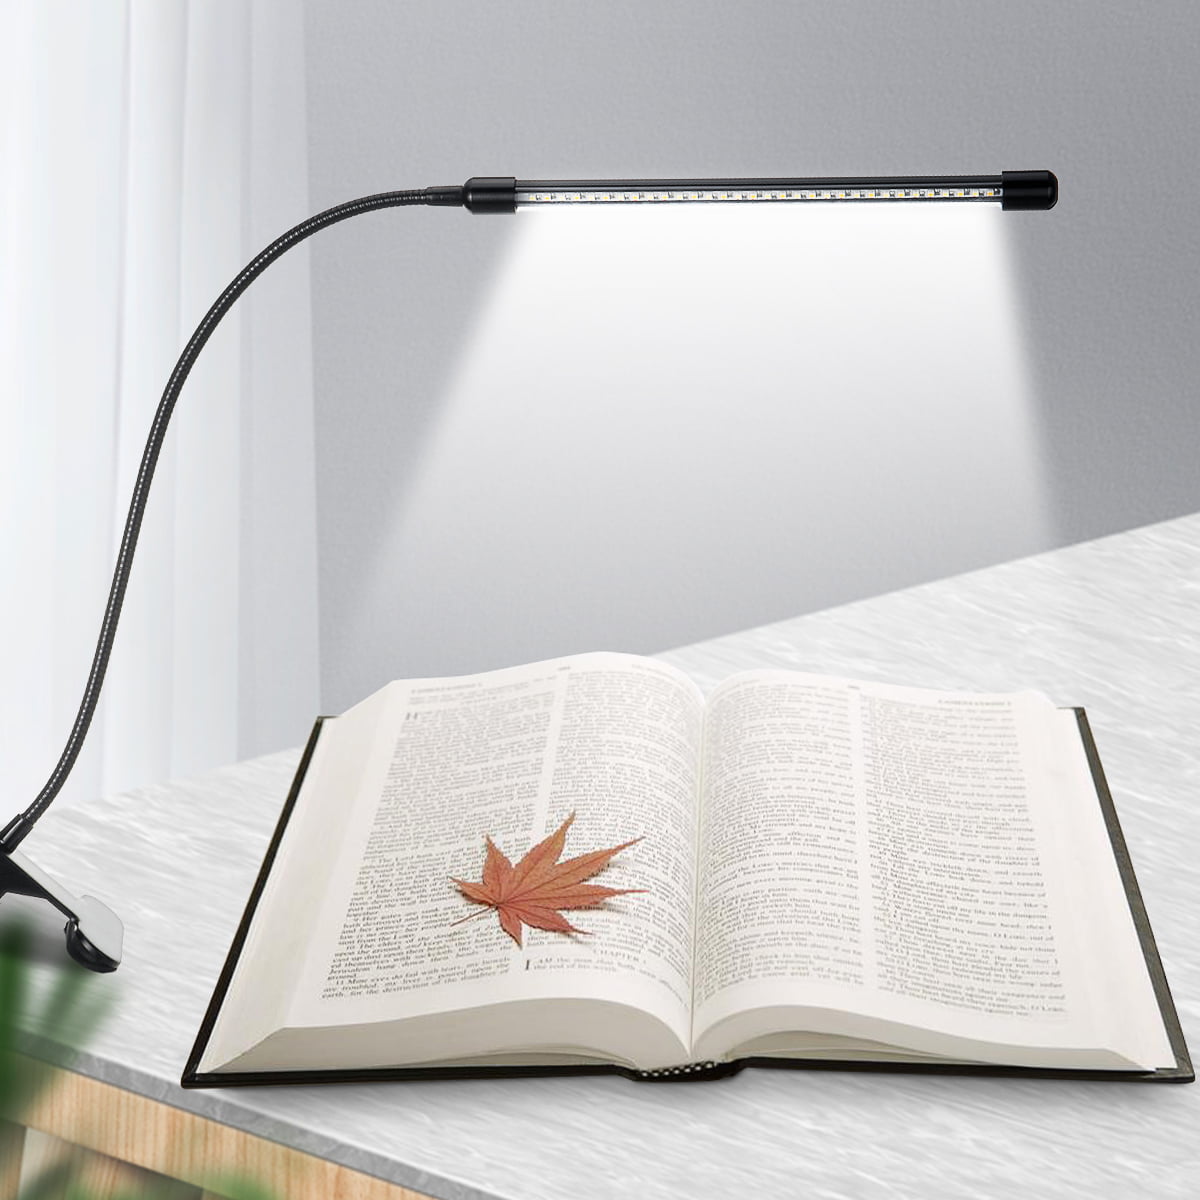 Dimmable Flexible 3 Modes USB LED Table Lamp Desk Light for Study Reading Home 